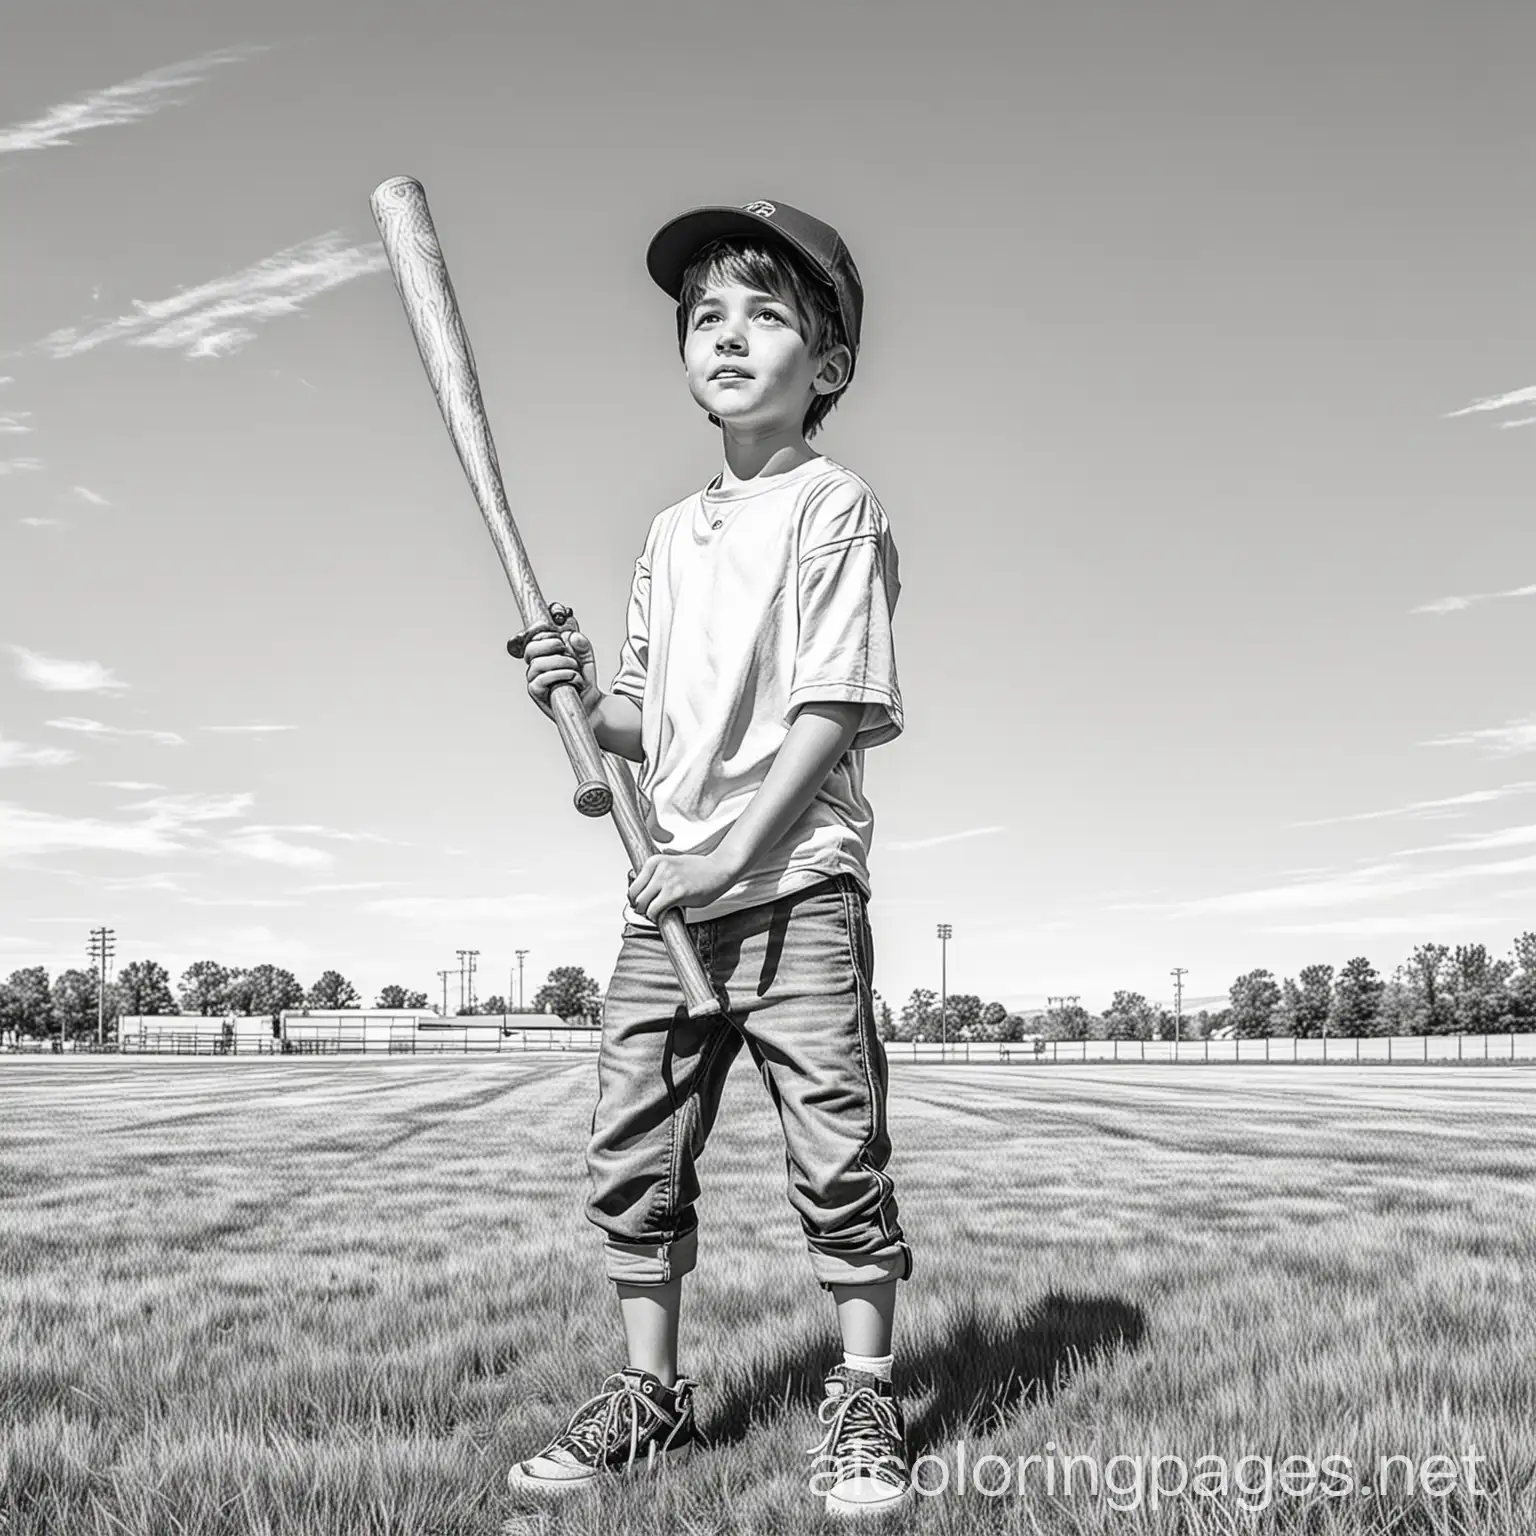 Young-Boy-Playing-Baseball-in-Field-Coloring-Page-Illustration